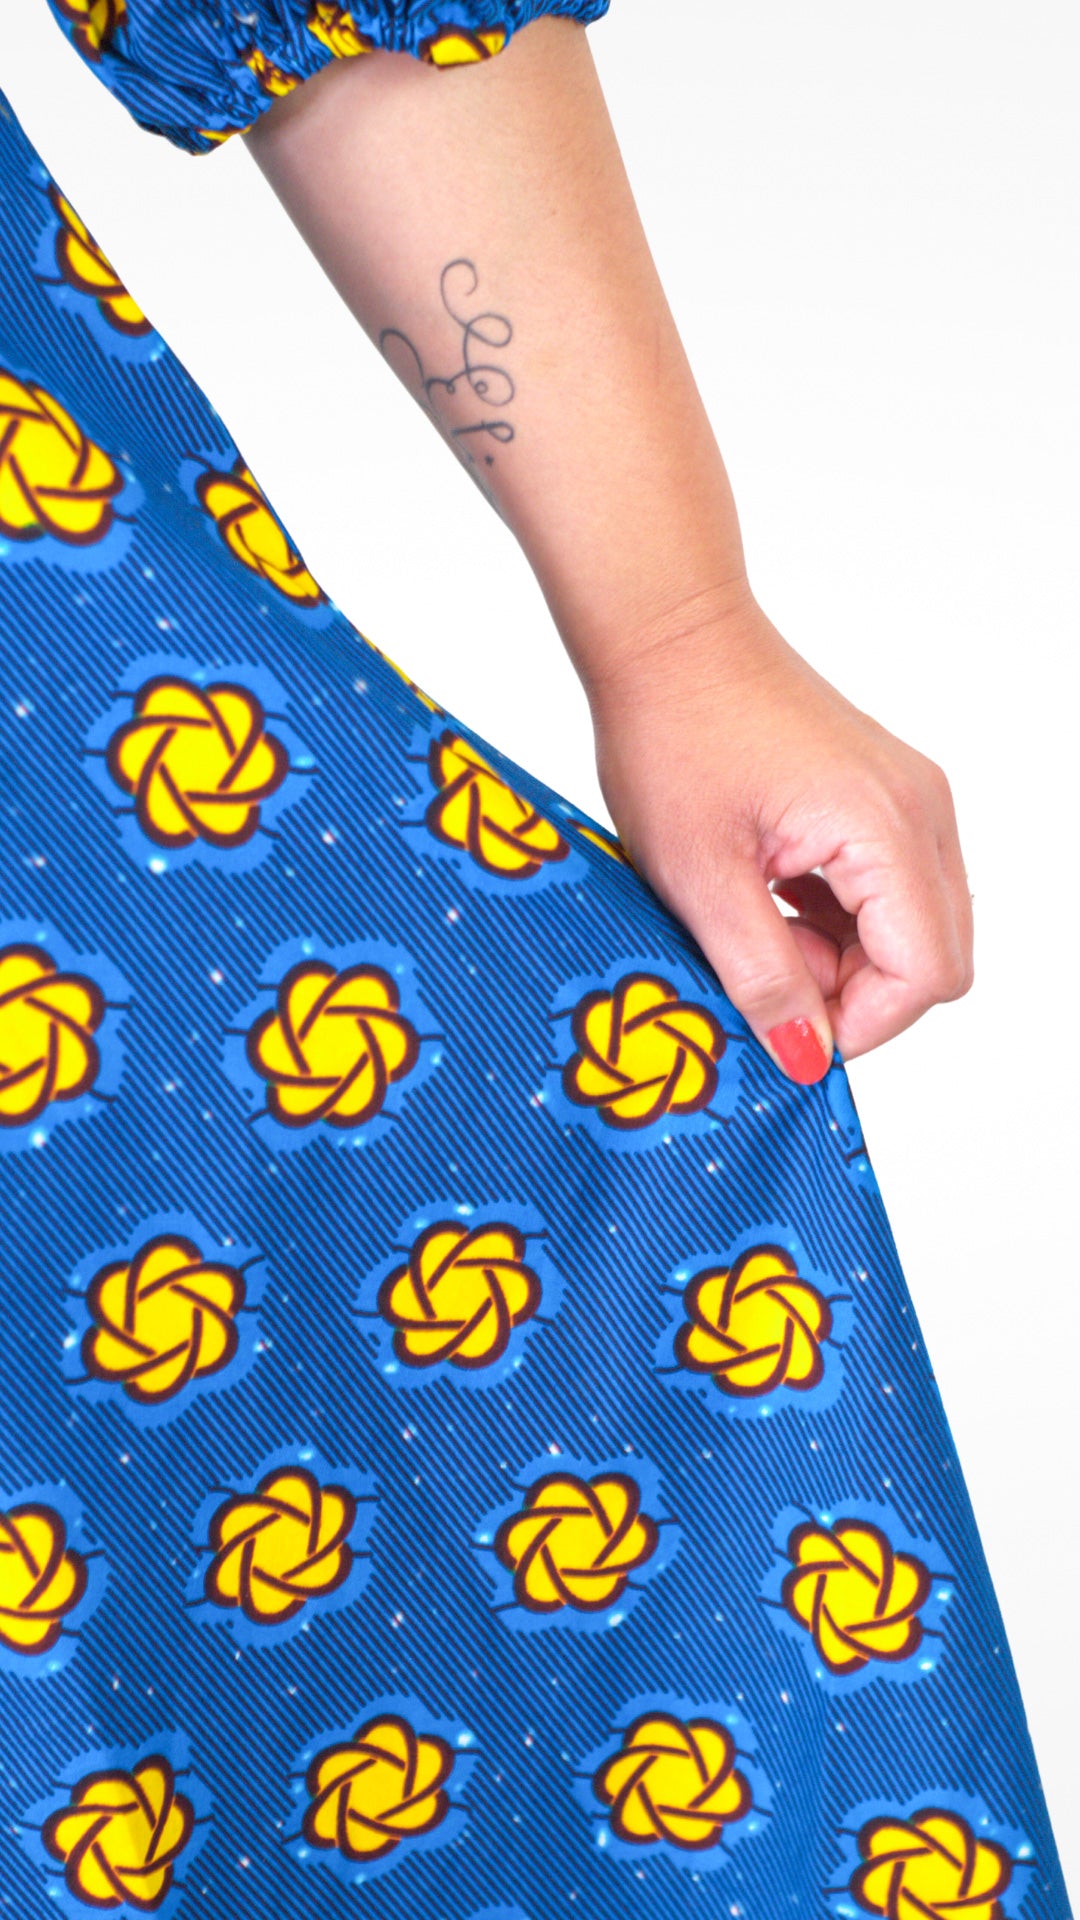 A close-up of a person's hand delicately holding the blue dress, emphasizing the fabric's texture and the beautiful yellow elements.